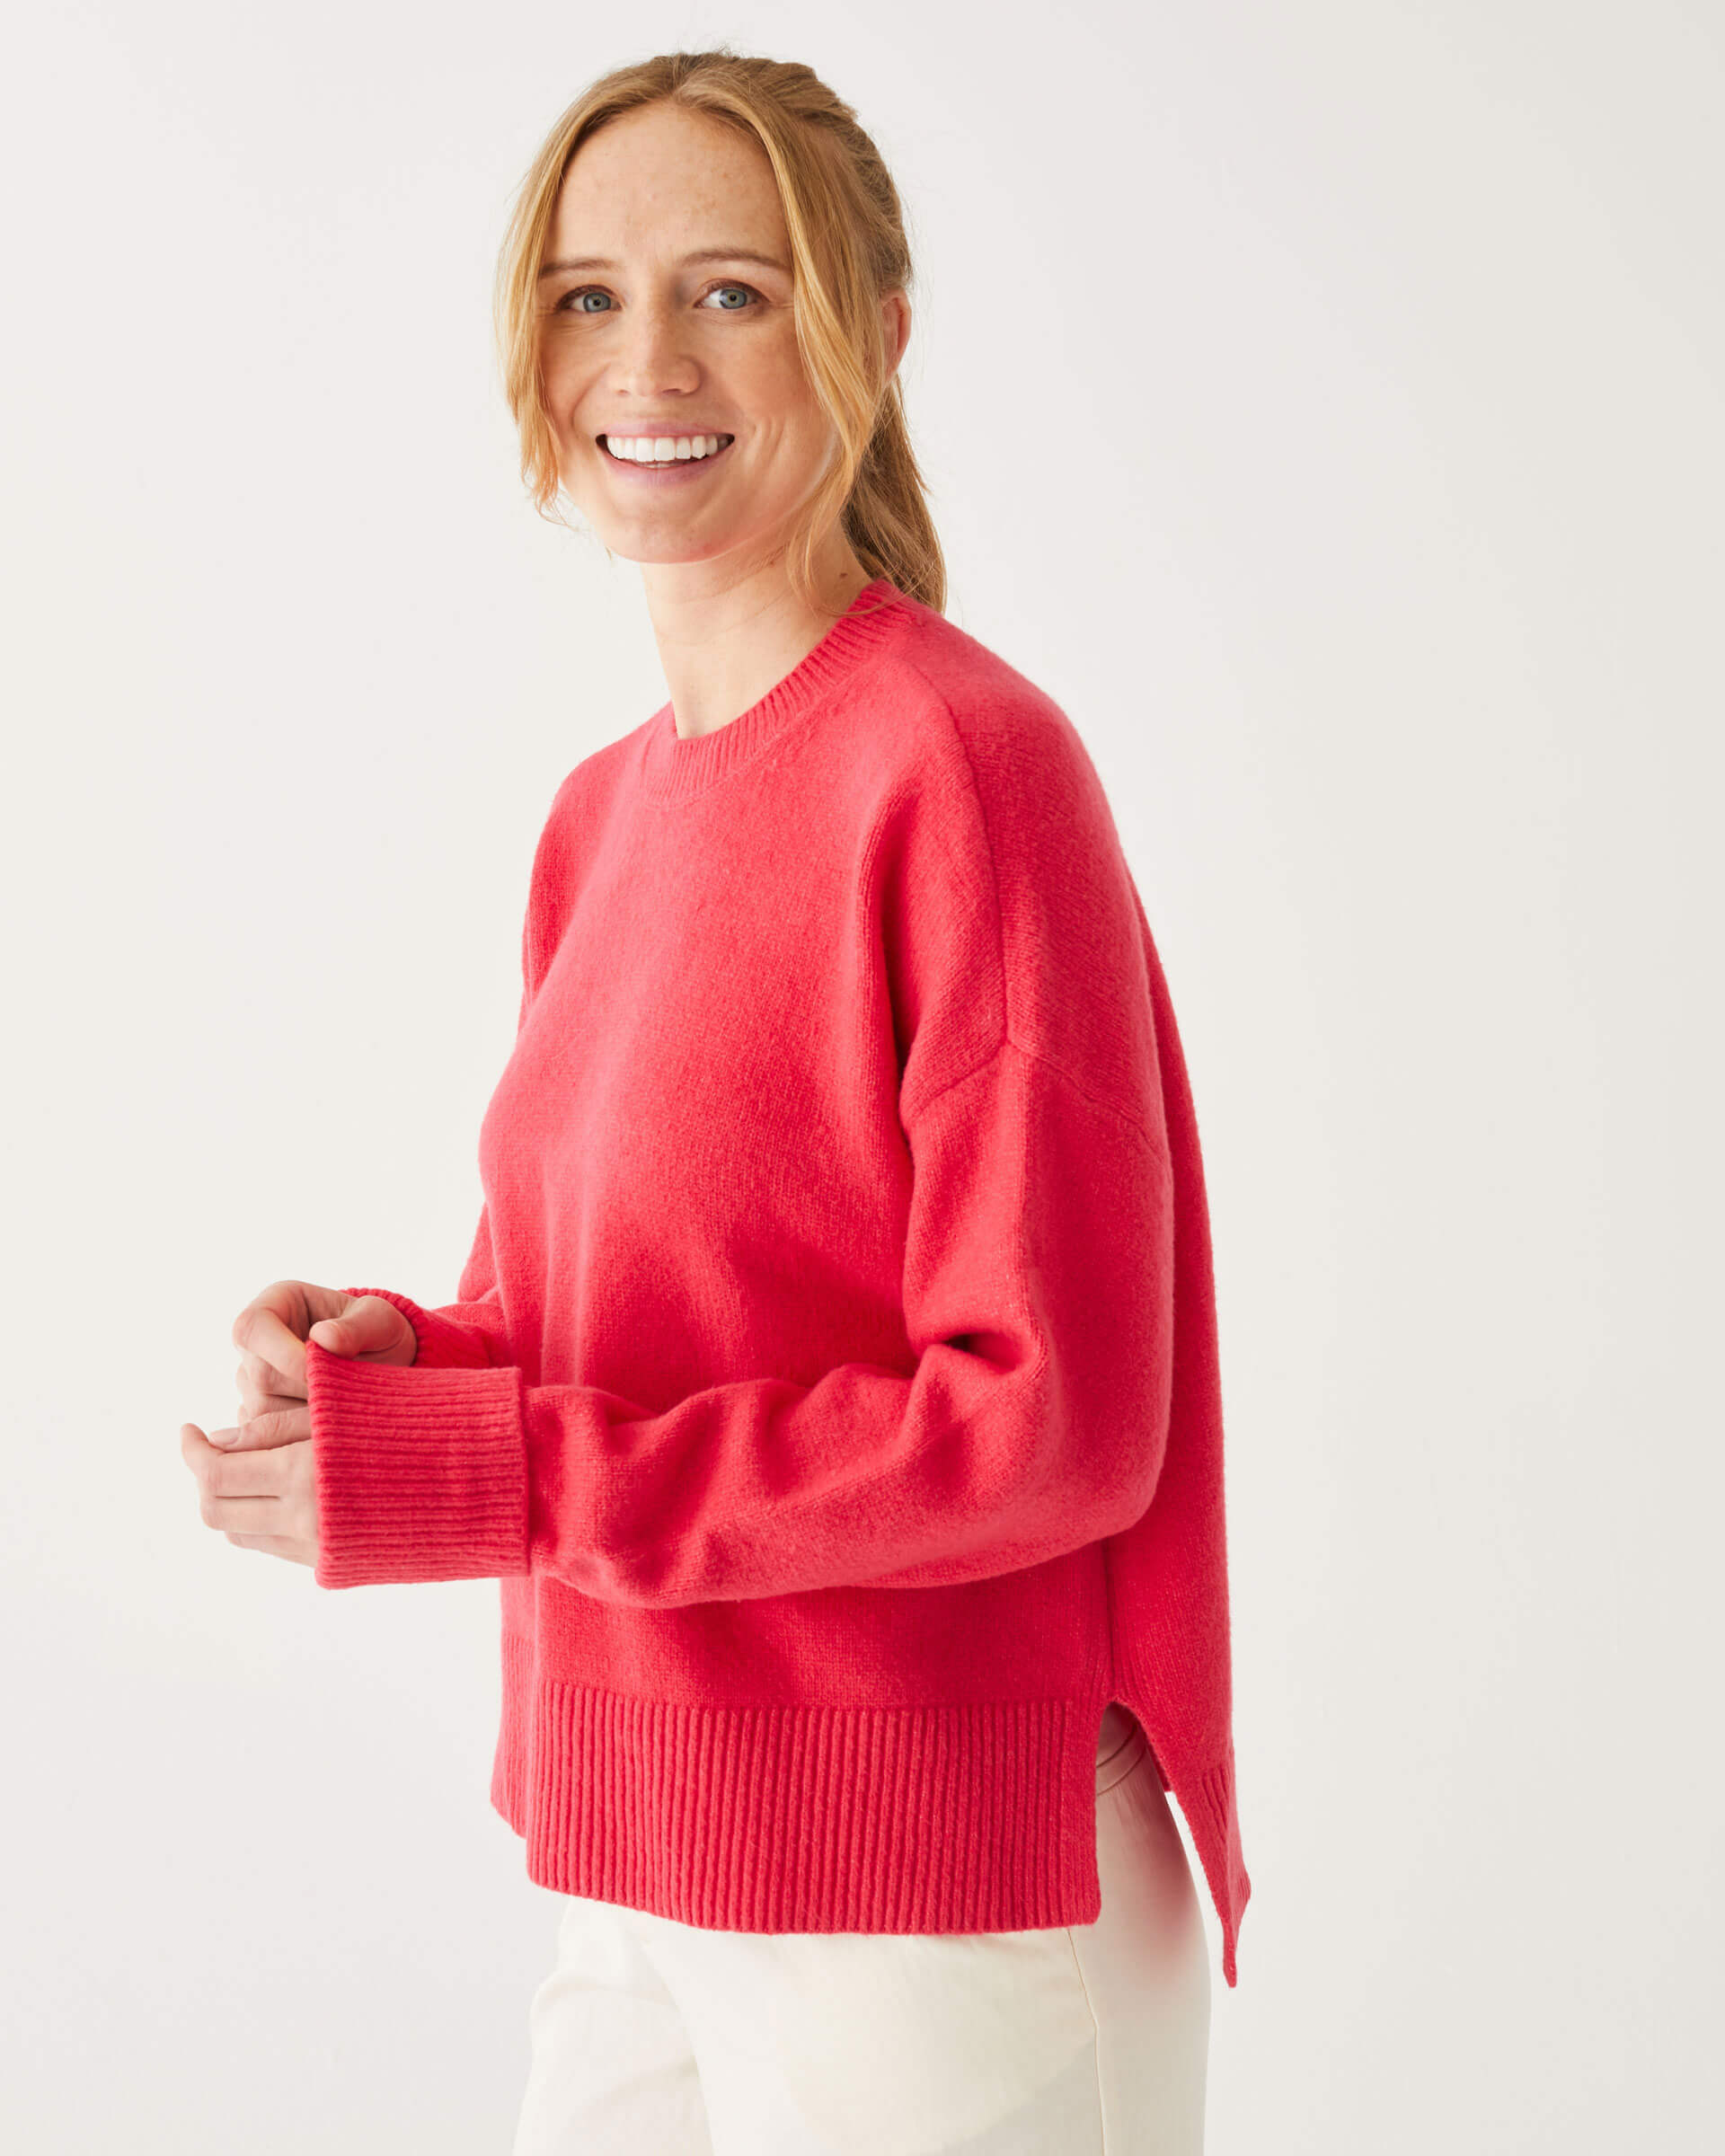 female wearing red crewneck sweater standing slightly to the side in front of a white background